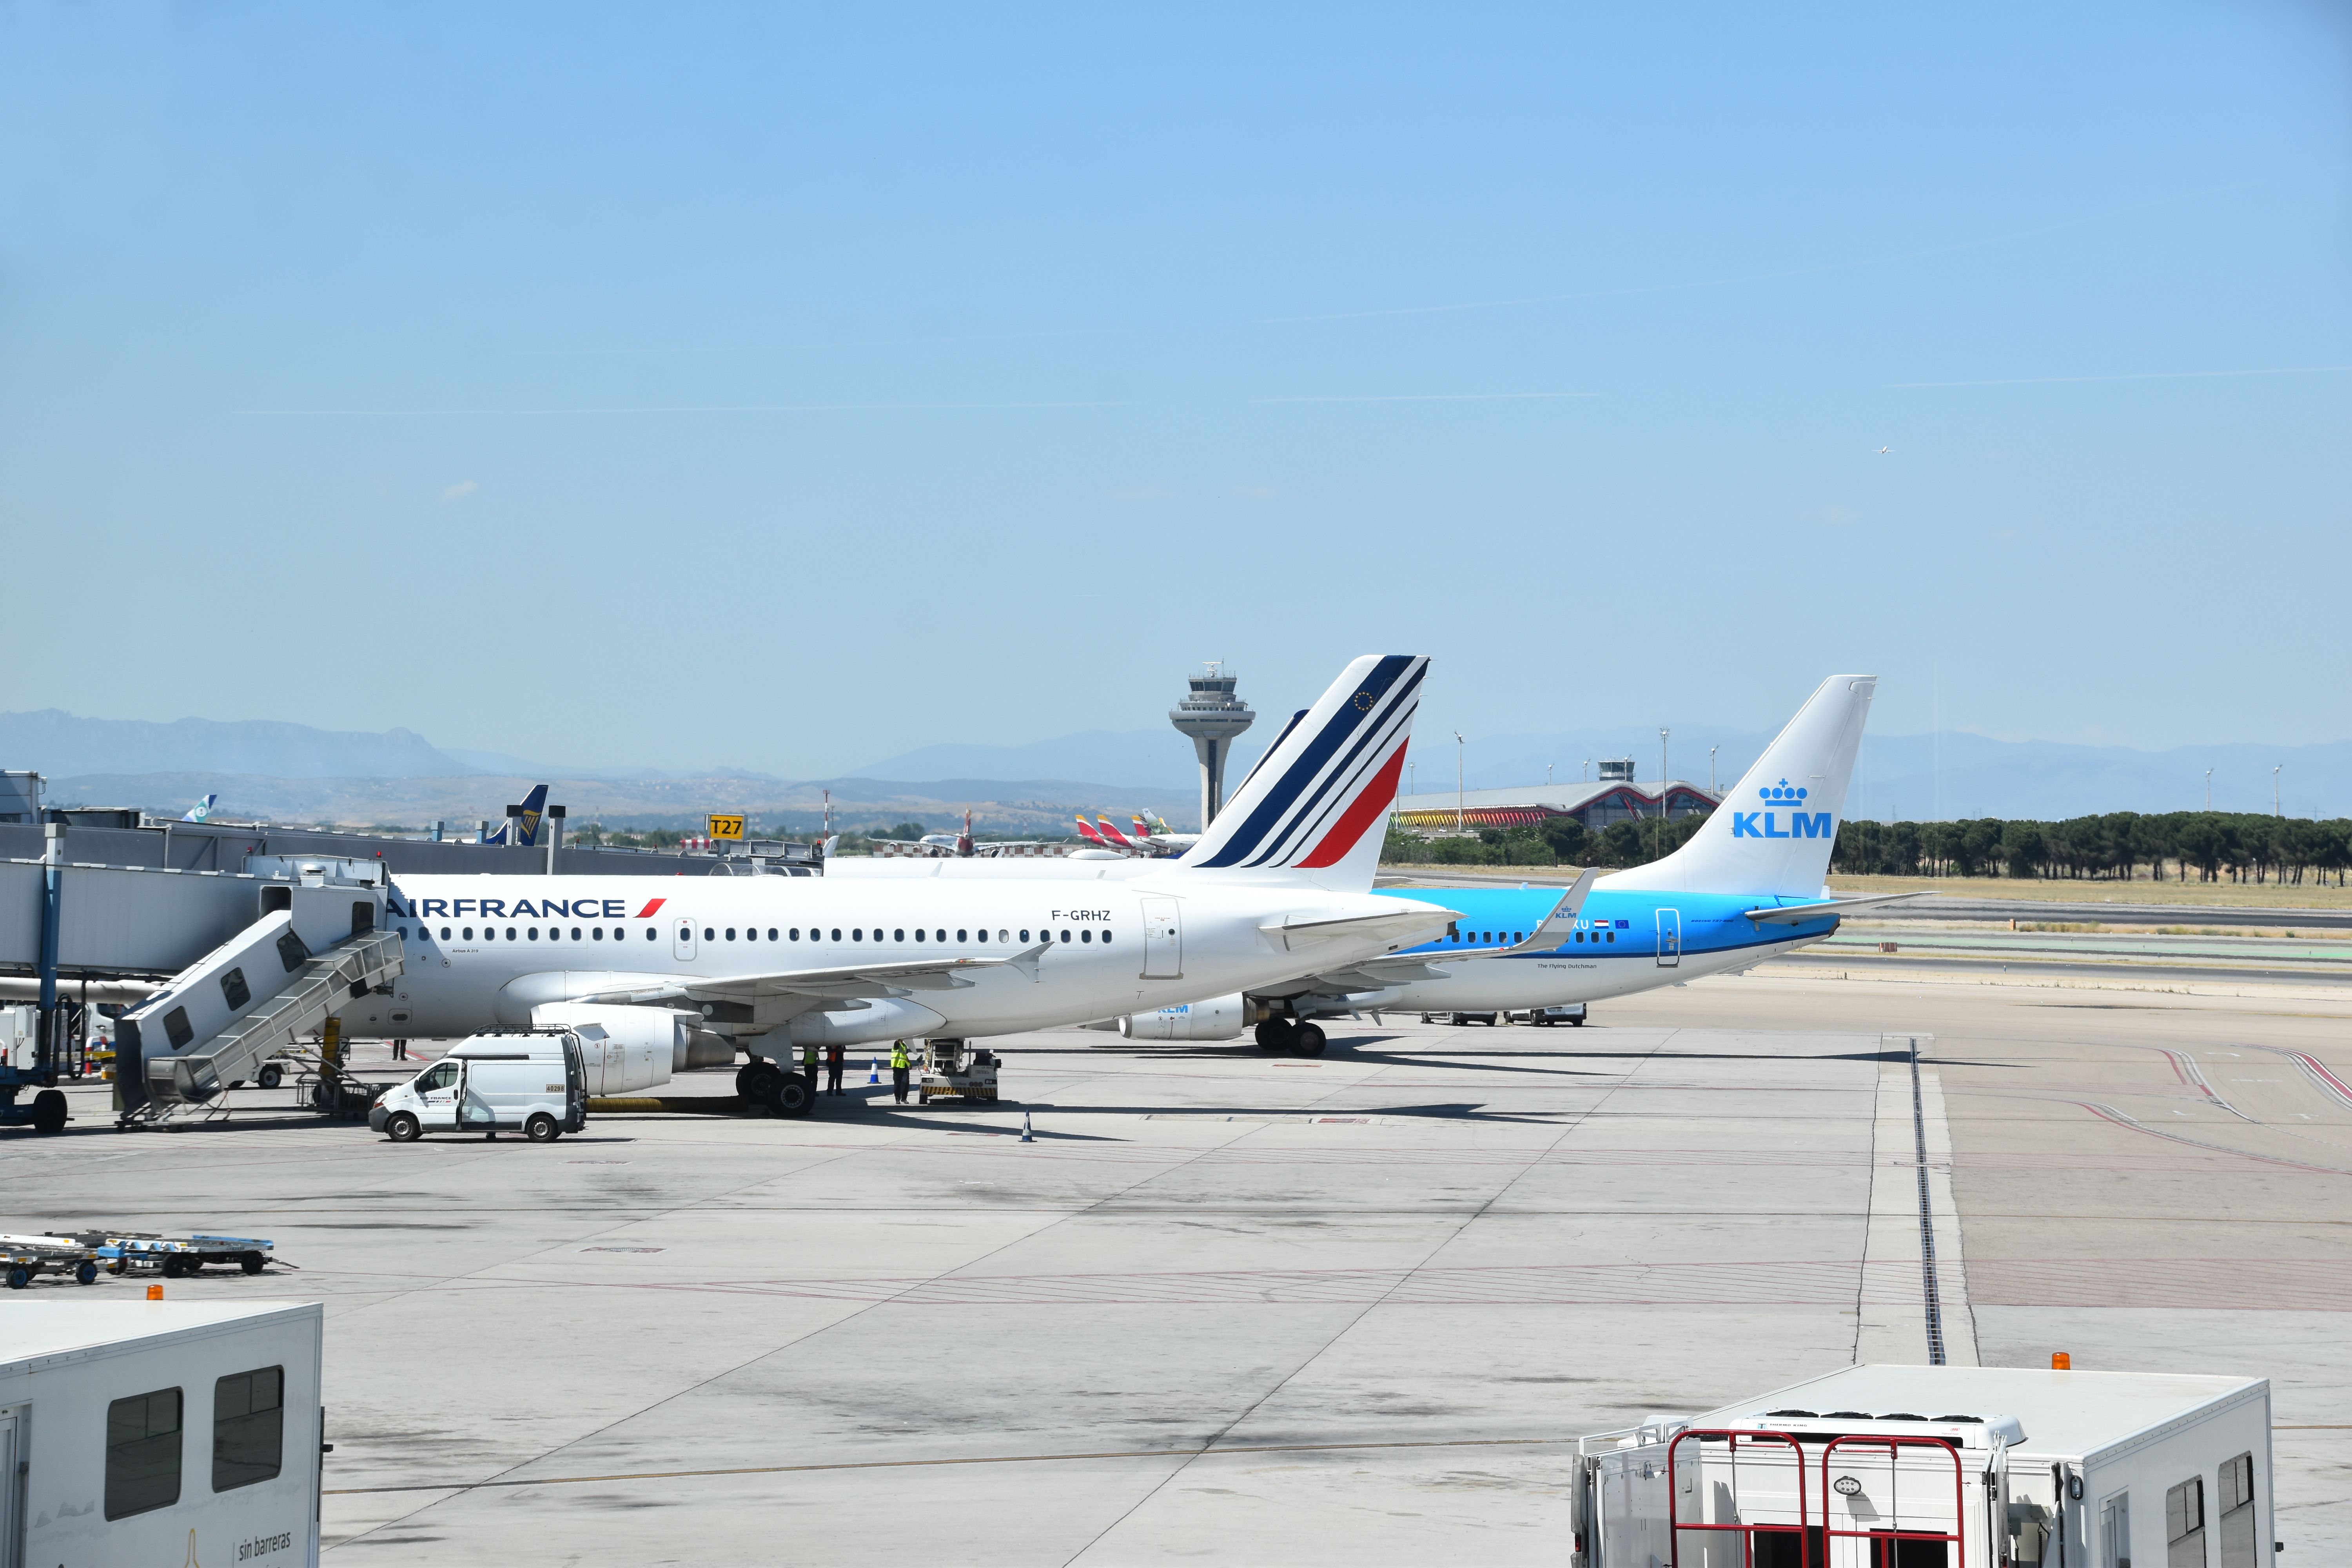 Air France Airbus A319 and KLM Boeing 737-800 at Paris Charles De Gaulle International Airport CDG shutterstock_1415057198